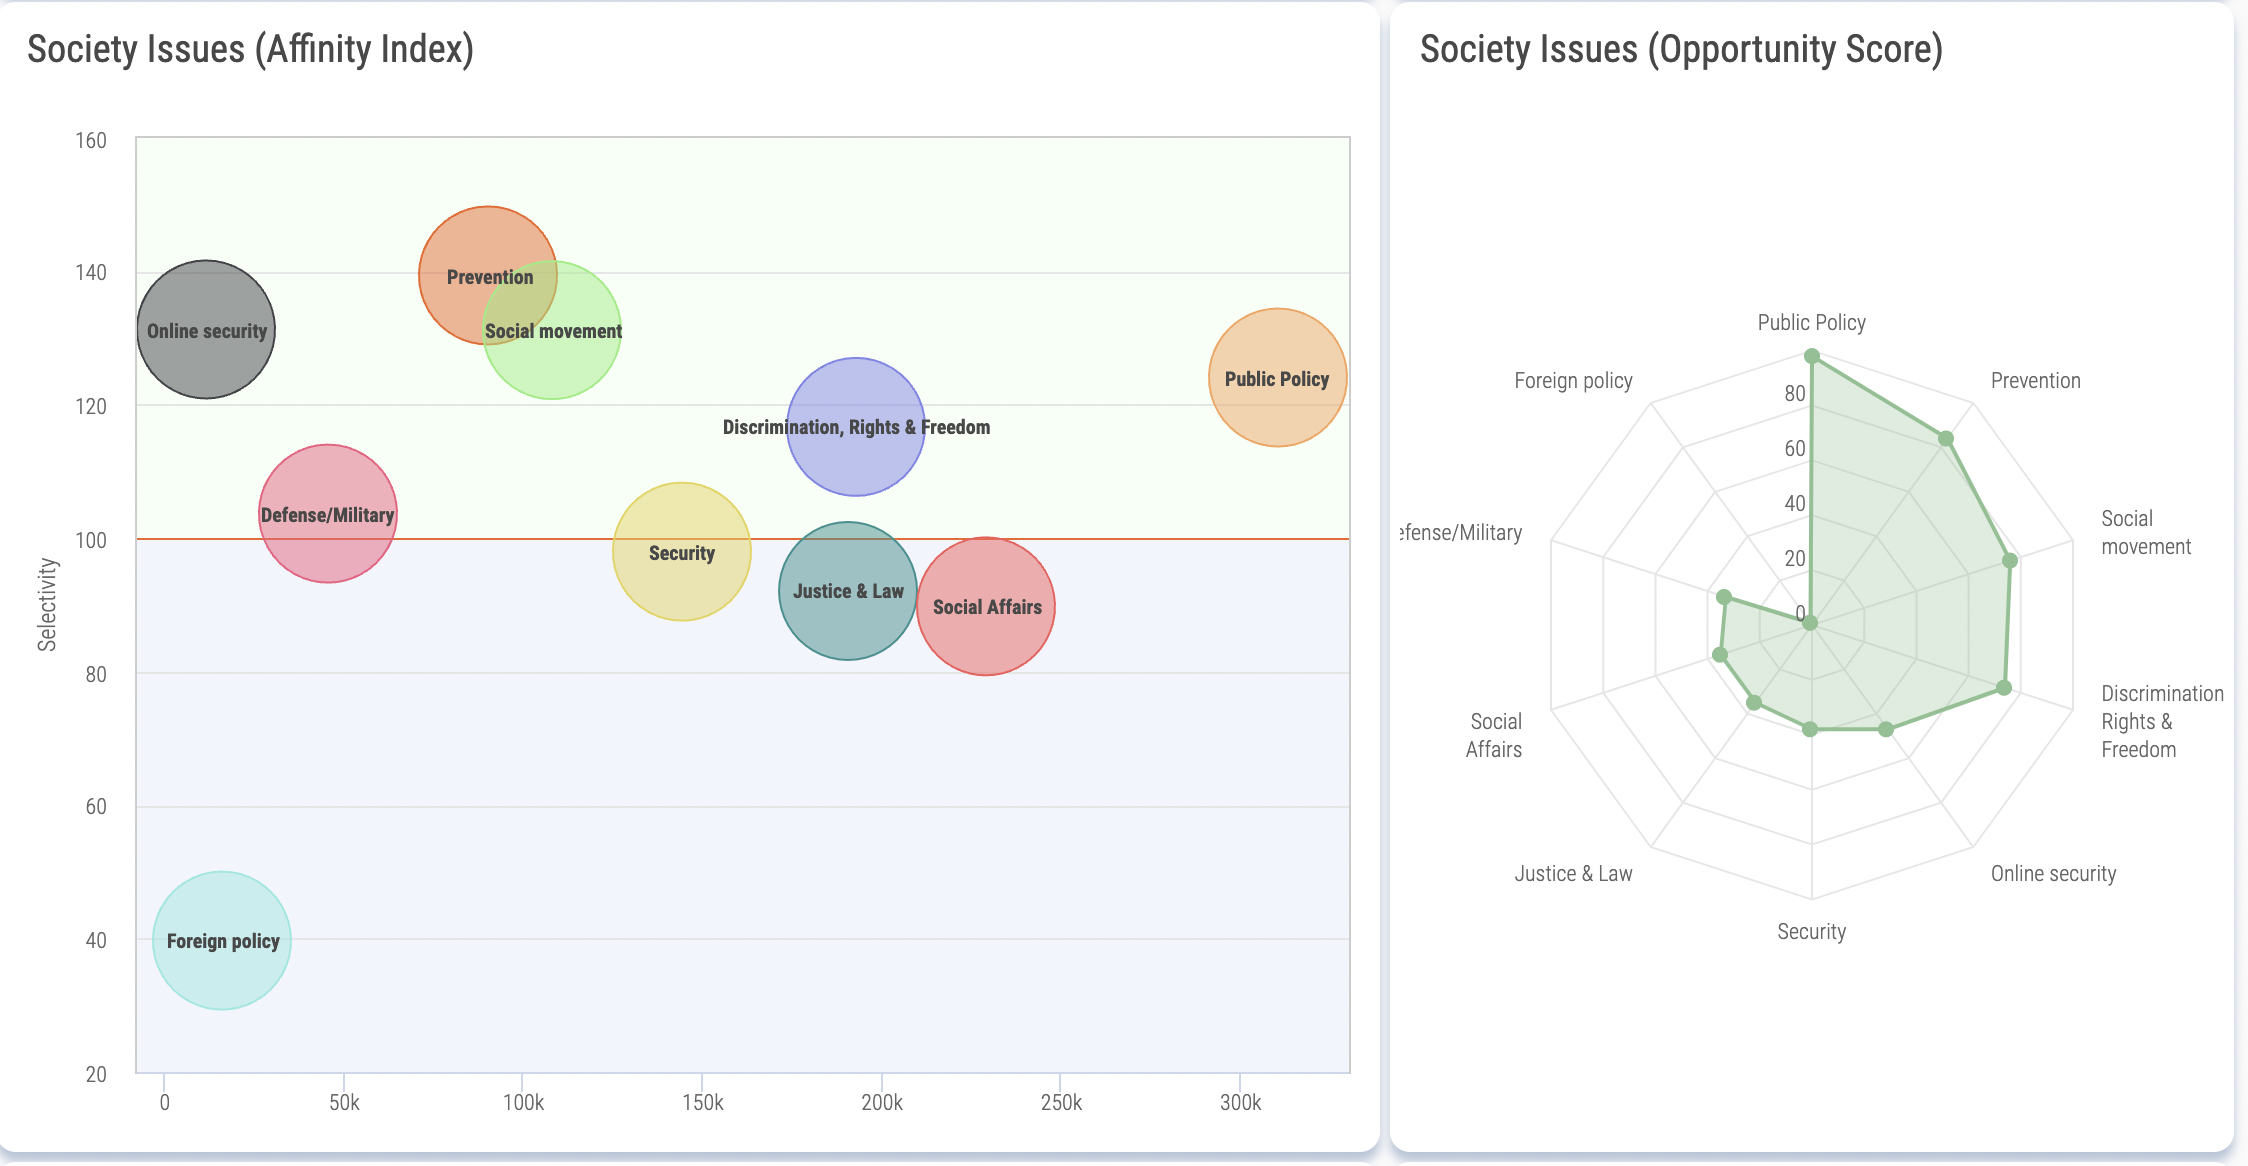 Soprism society issues audience insights